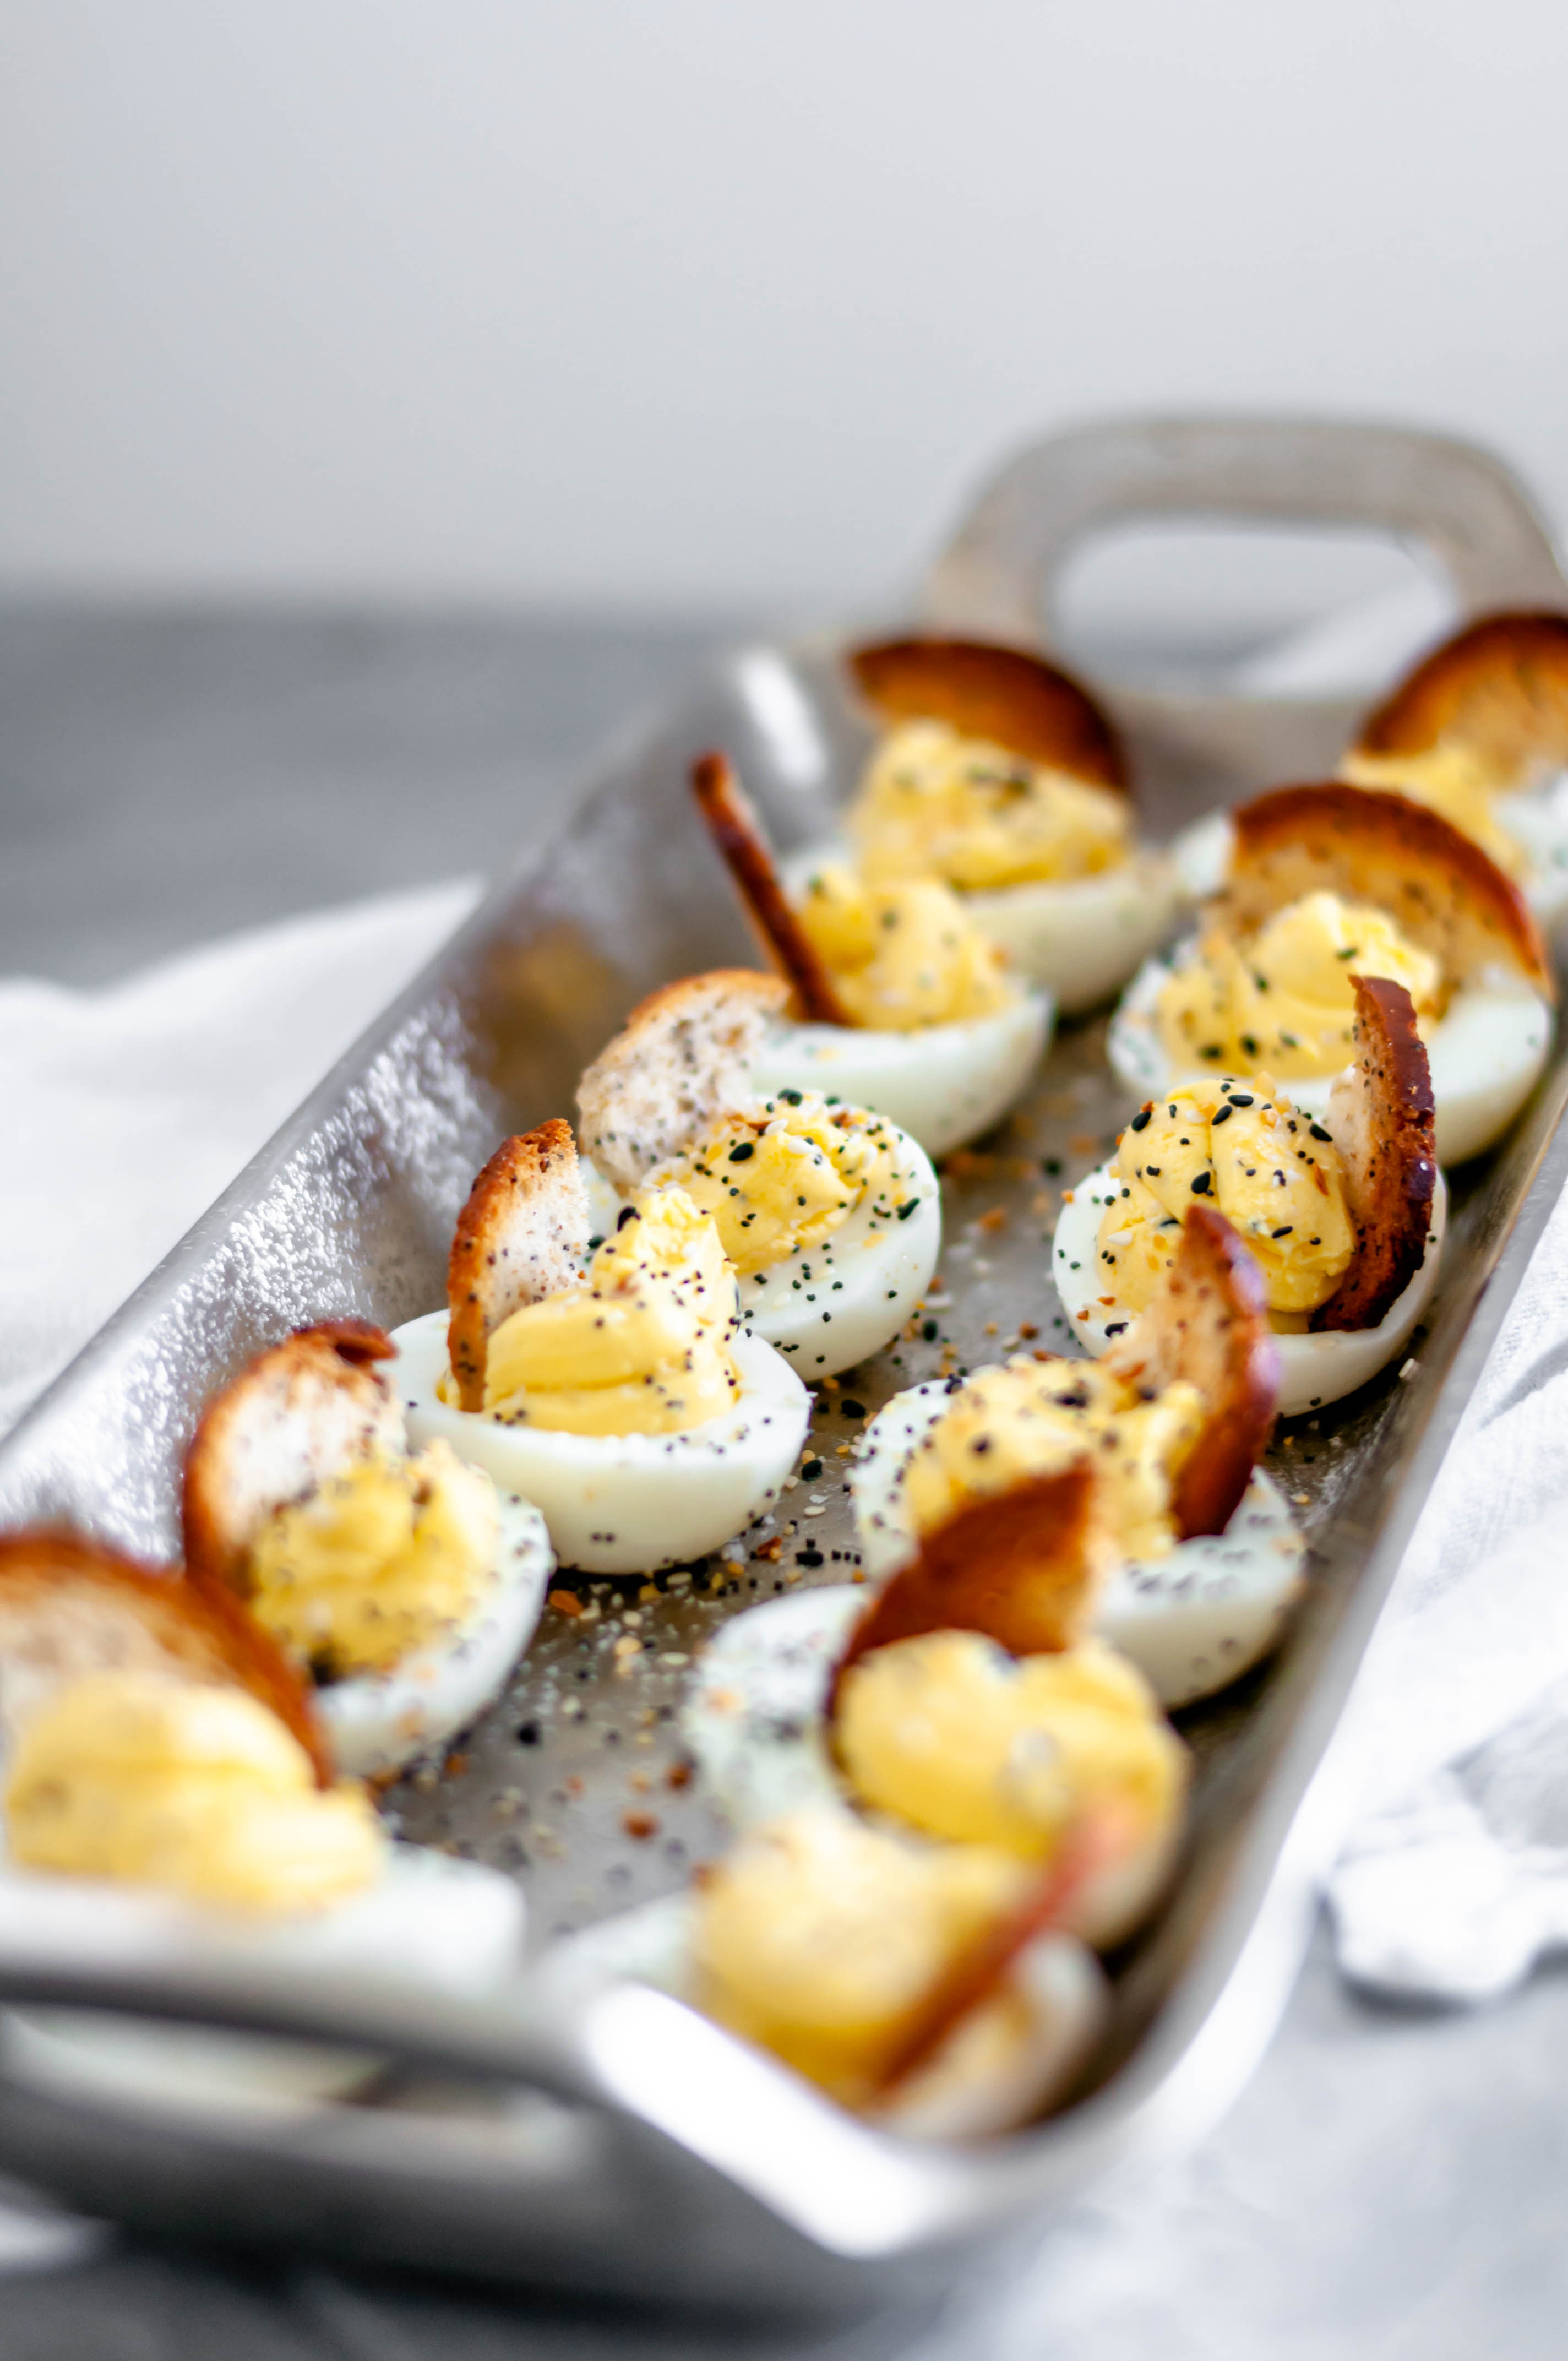 Perfect Soft-Boiled Eggs With Everything Bagel Seasoning